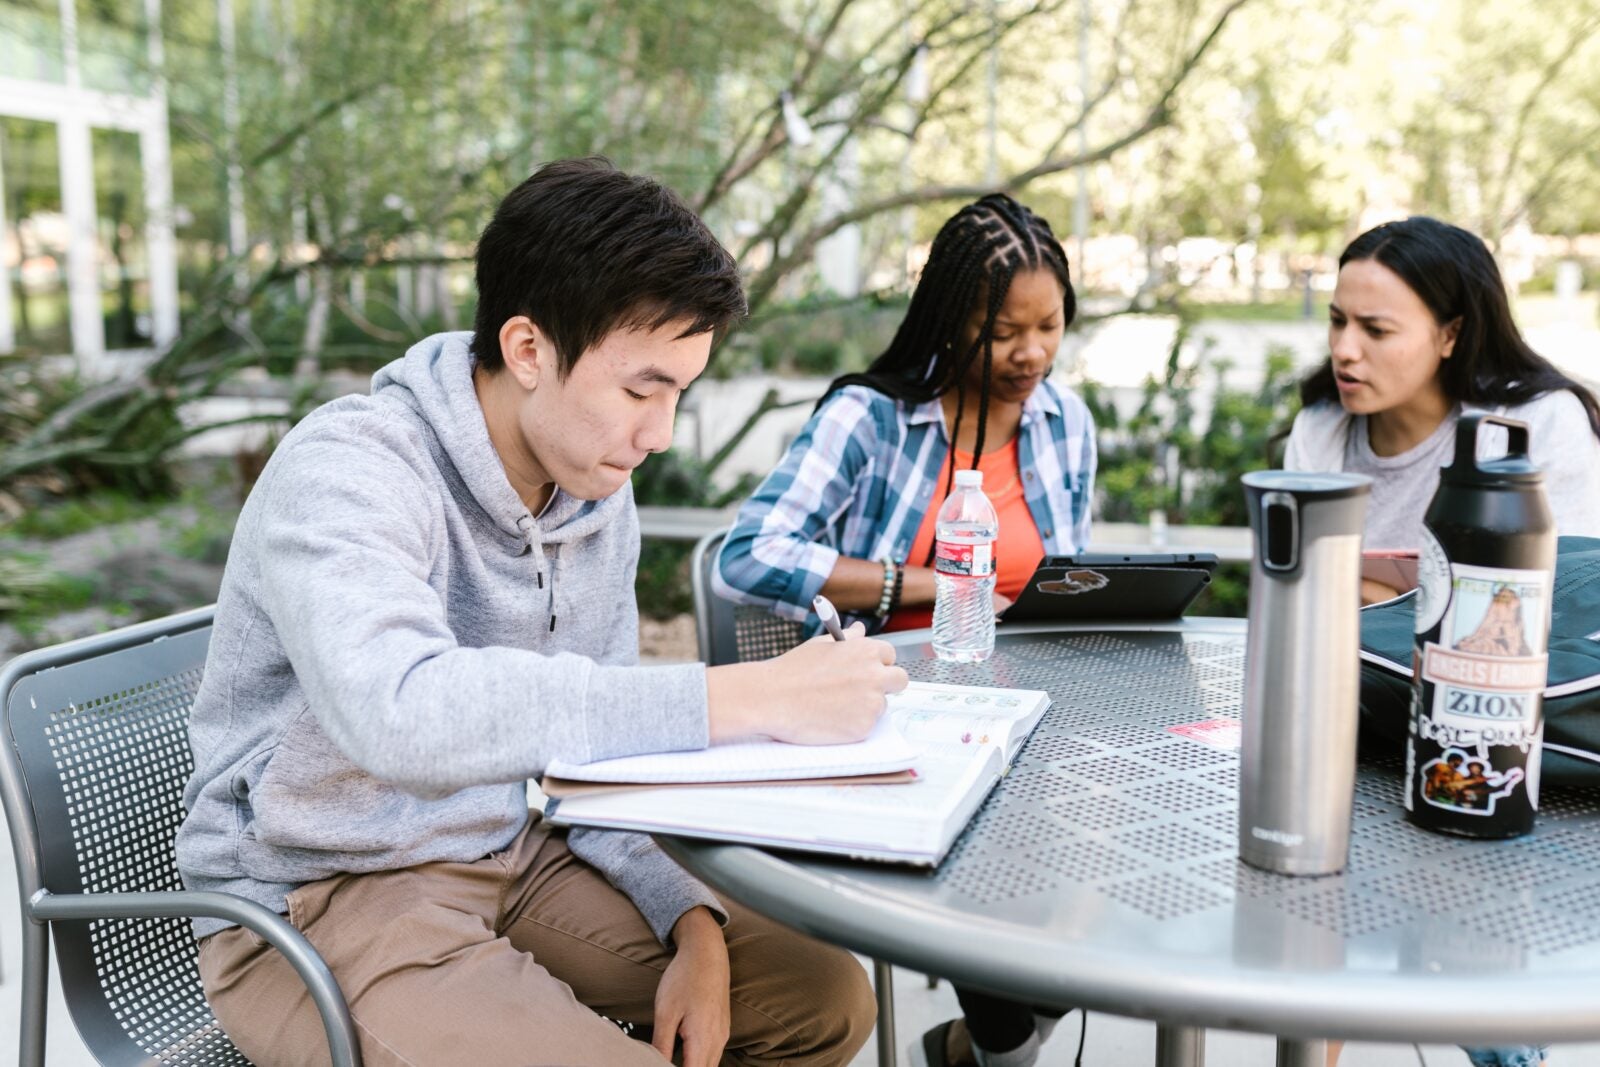 Two women and one man sitting together  at a table outdoors to study.